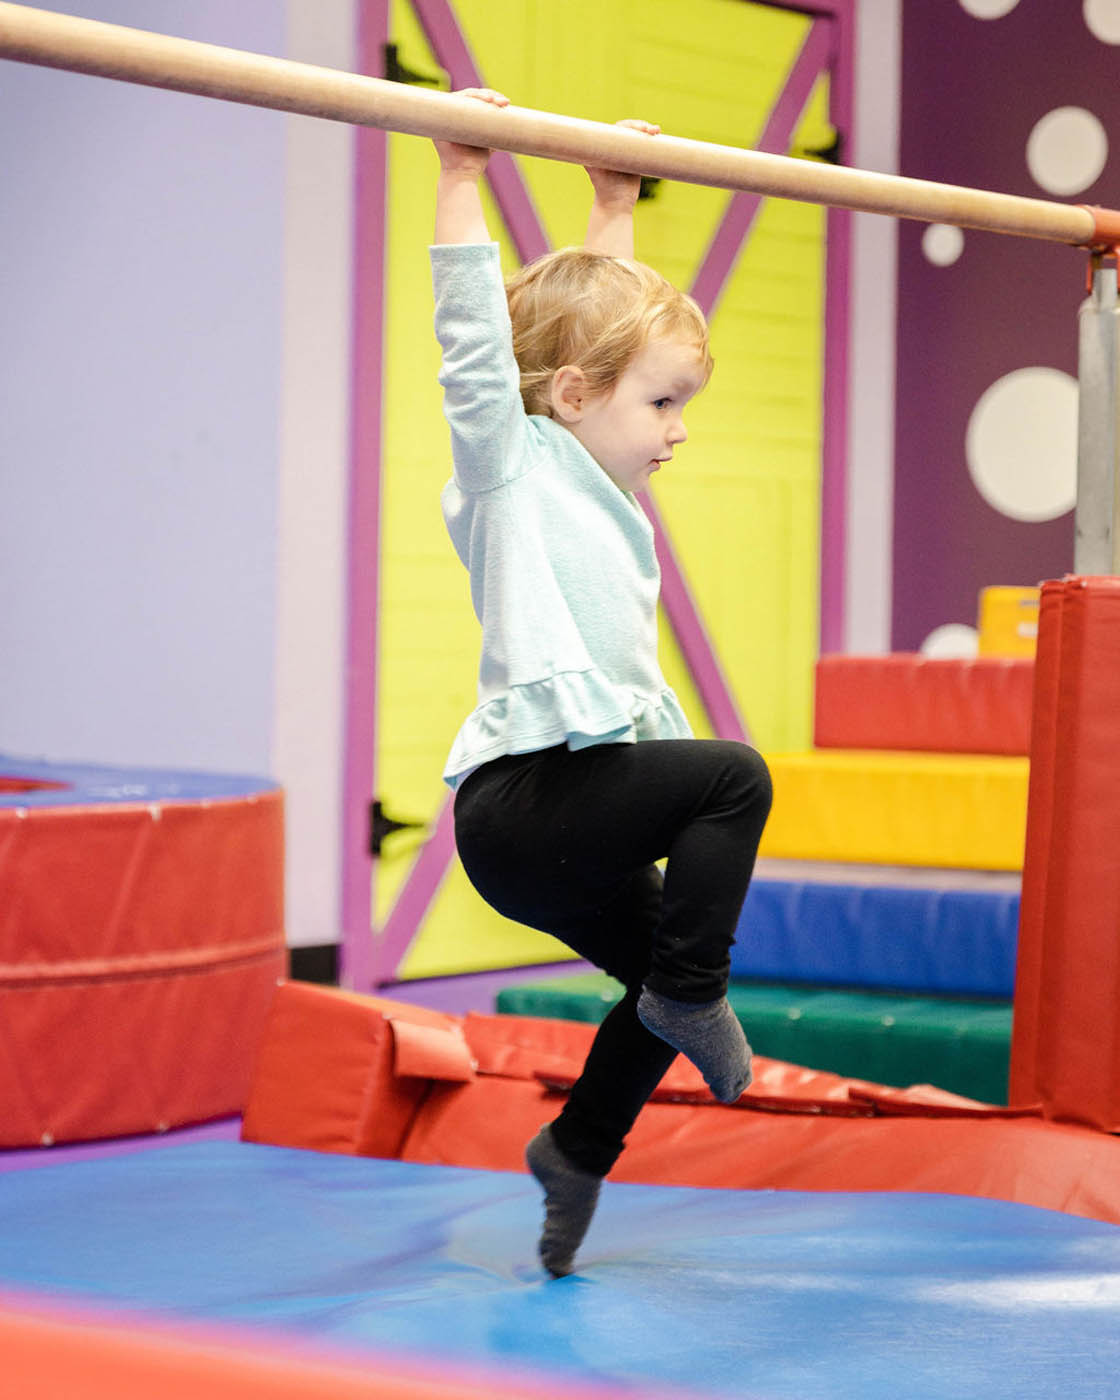 A kid swining from Romp n' Roll gym equipment - safe kids fitness classes in Raleigh, NC.